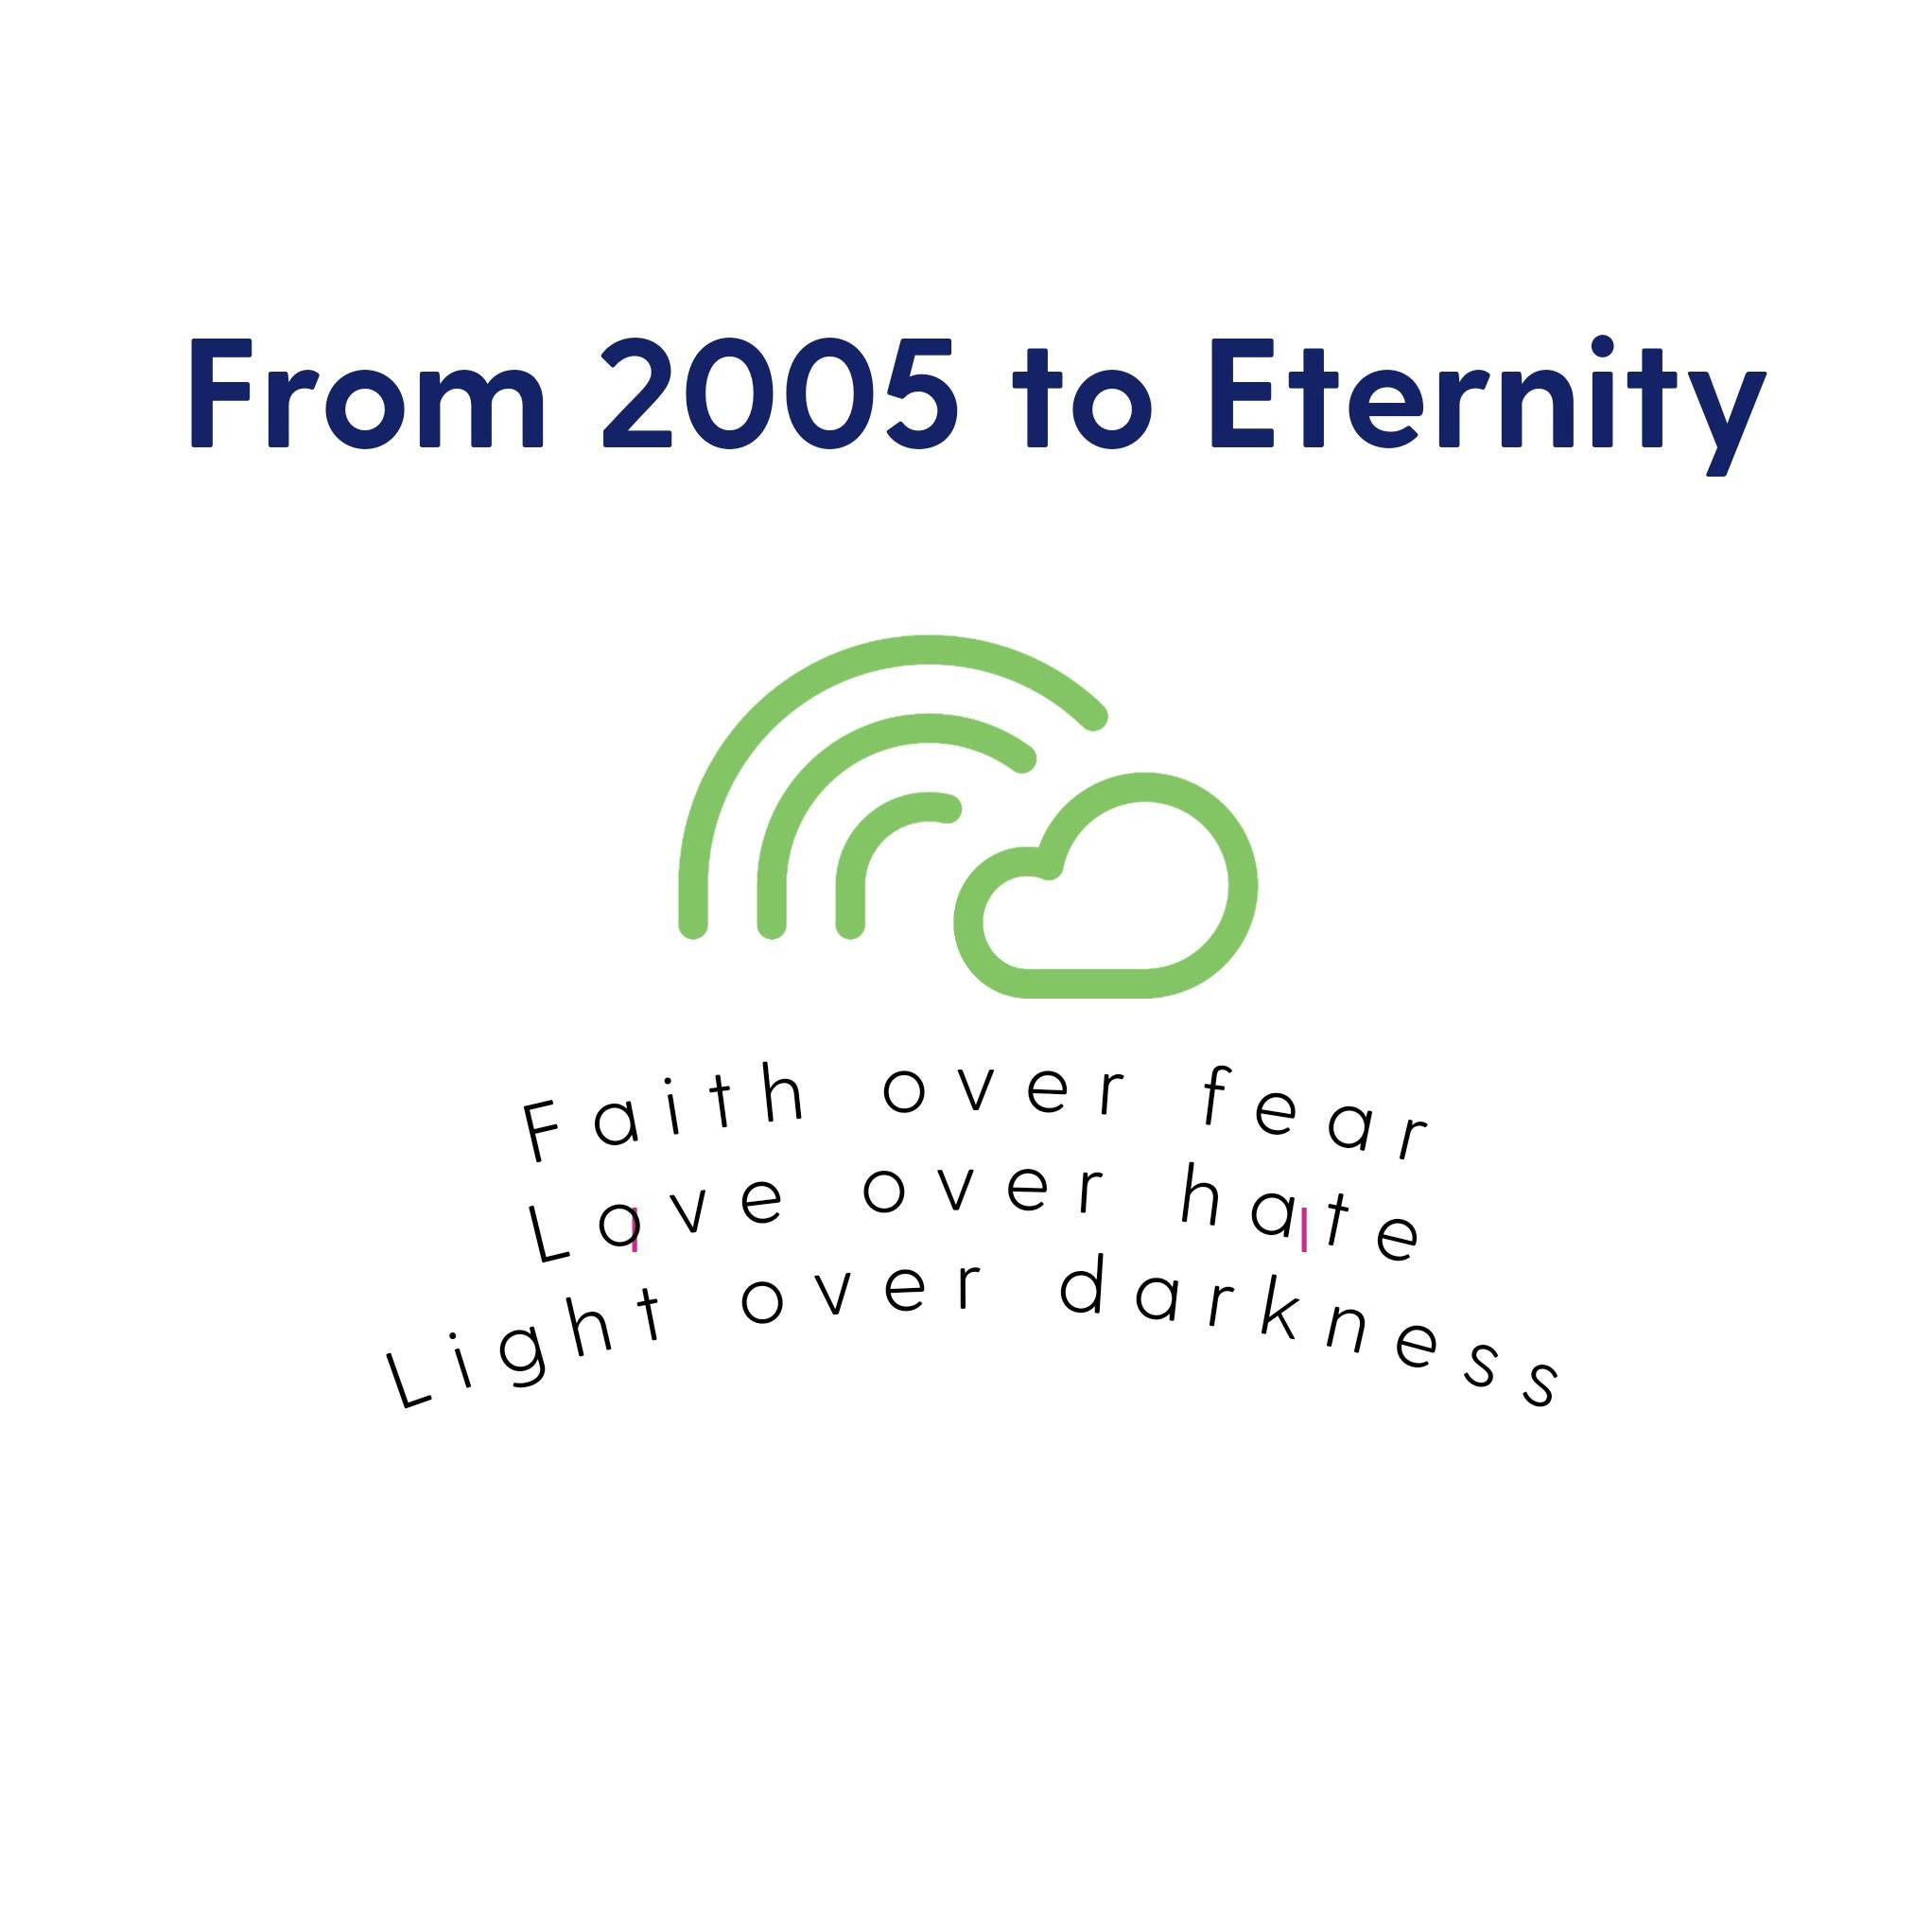 From 2005 to Eternity Faith over fear Love over hate Light over darkness